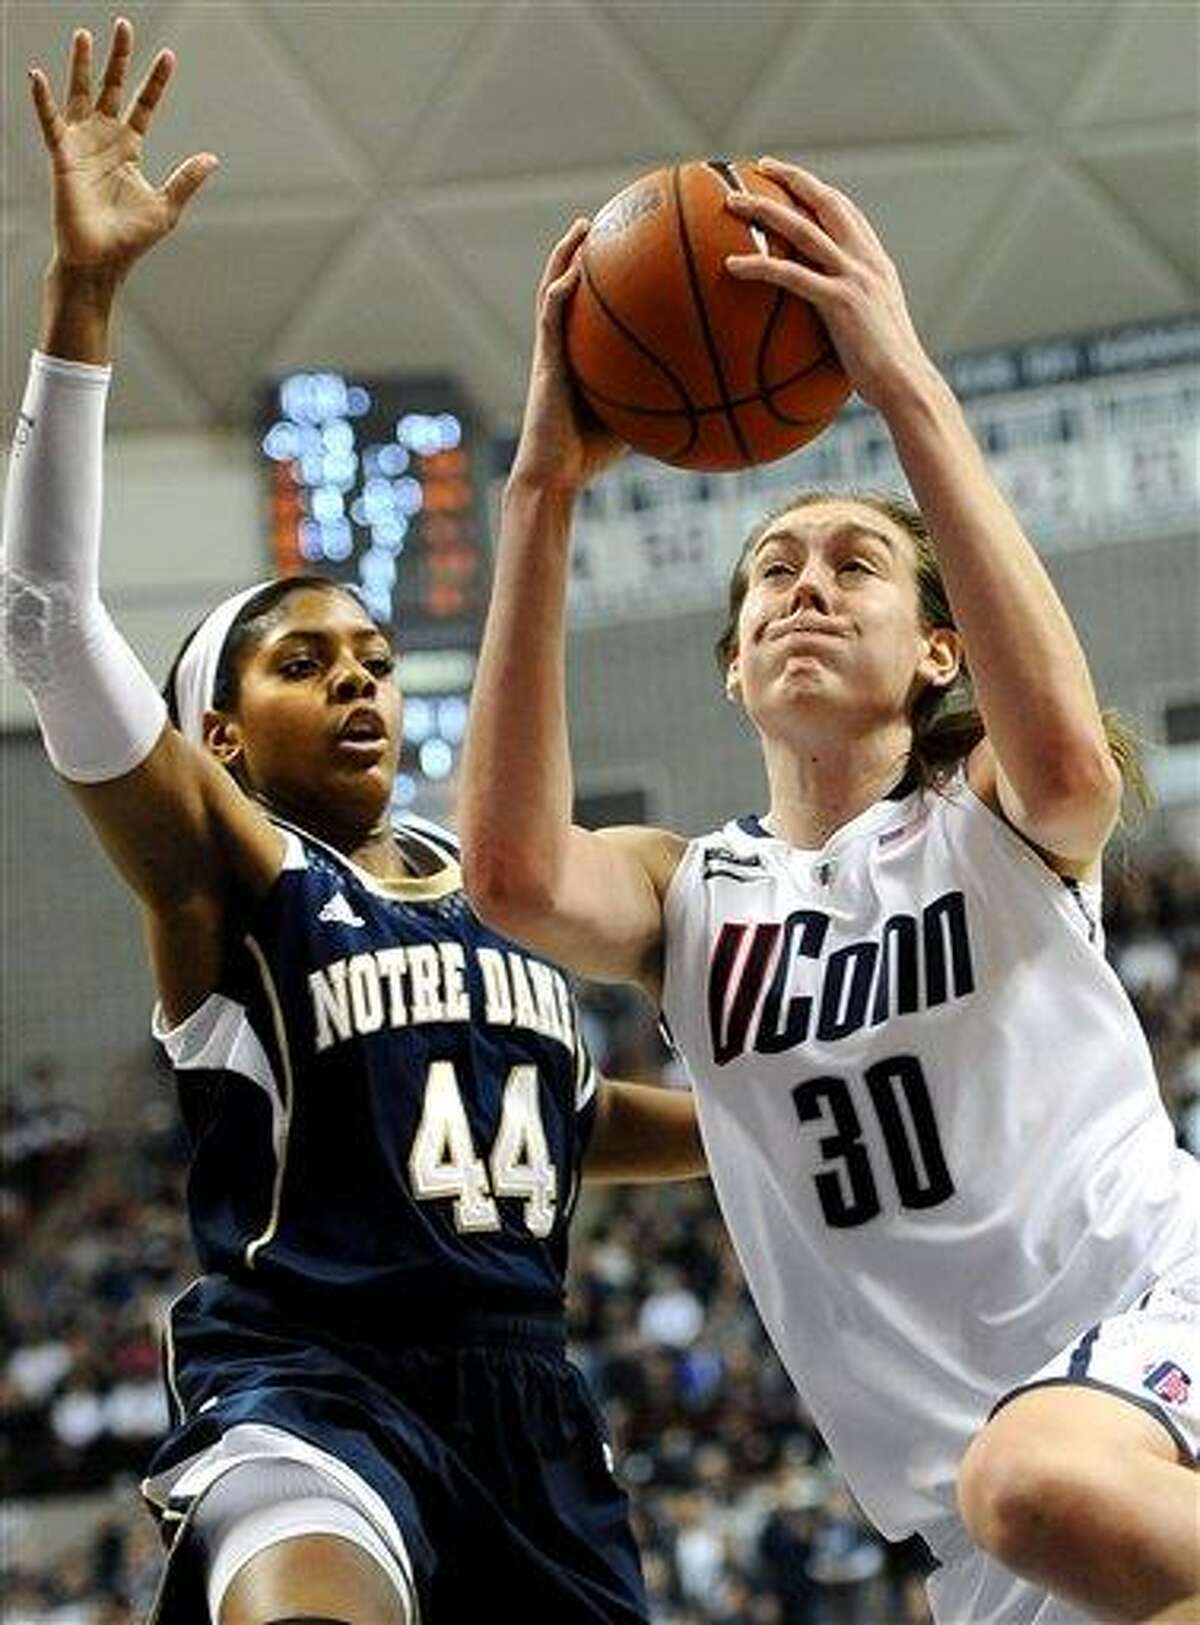 Connecticut's Breanna Stewart (30) drives to the basket while guarded by Notre Dame's Ariel Braker during the second half of an NCAA college basketball game in Storrs, Conn., Saturday, Jan. 5, 2013. Notre Dame won 73-72. (AP Photo/Jessica Hill)